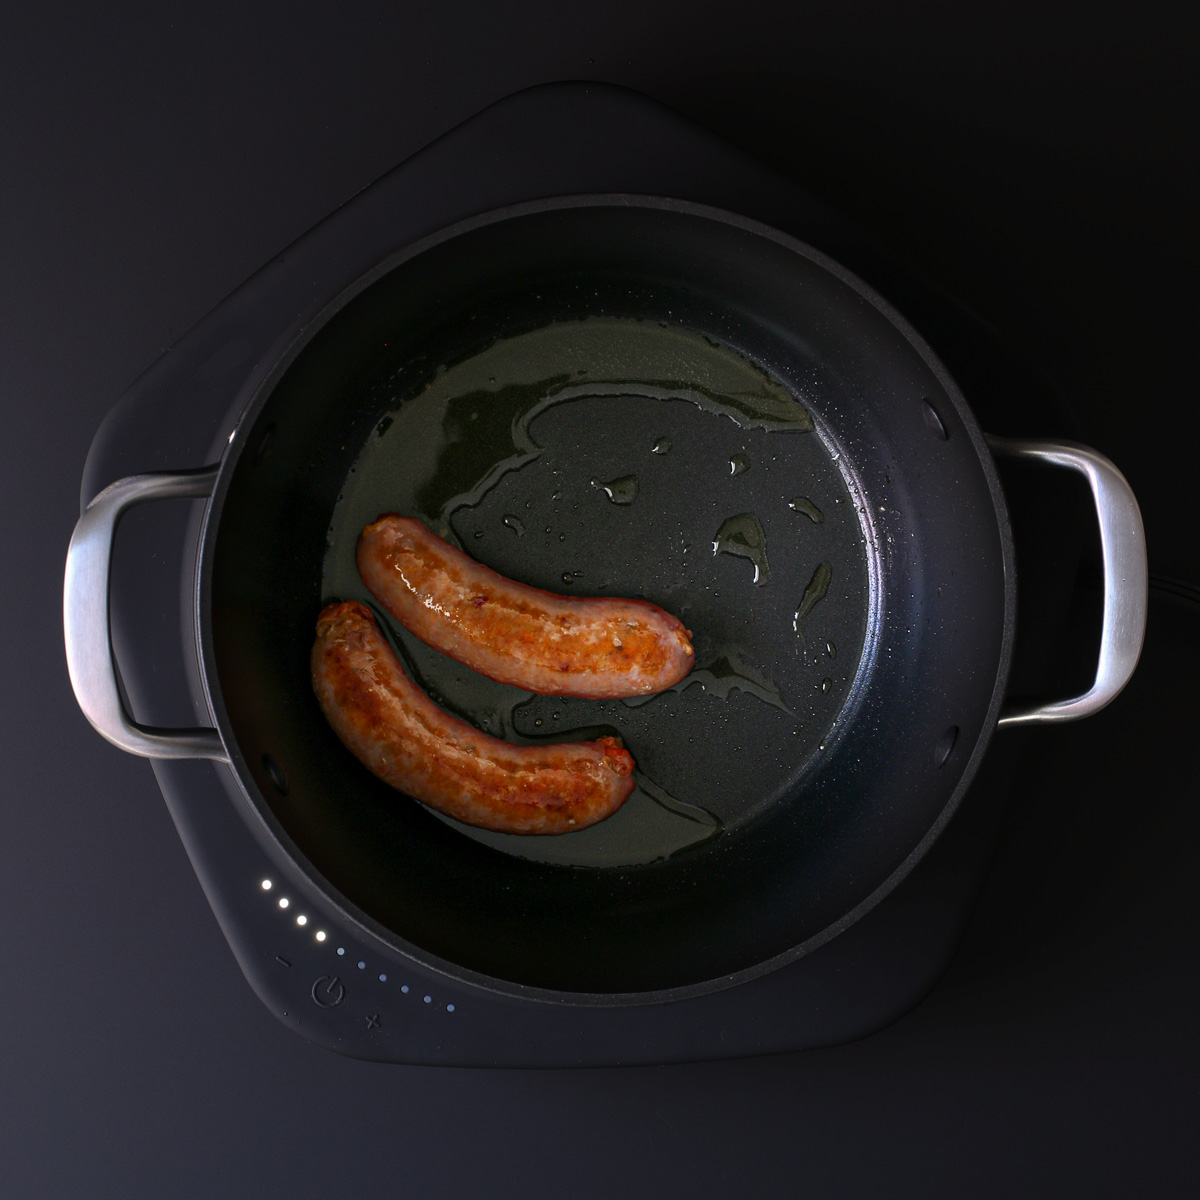 sautéing sausages in oil in the pot.